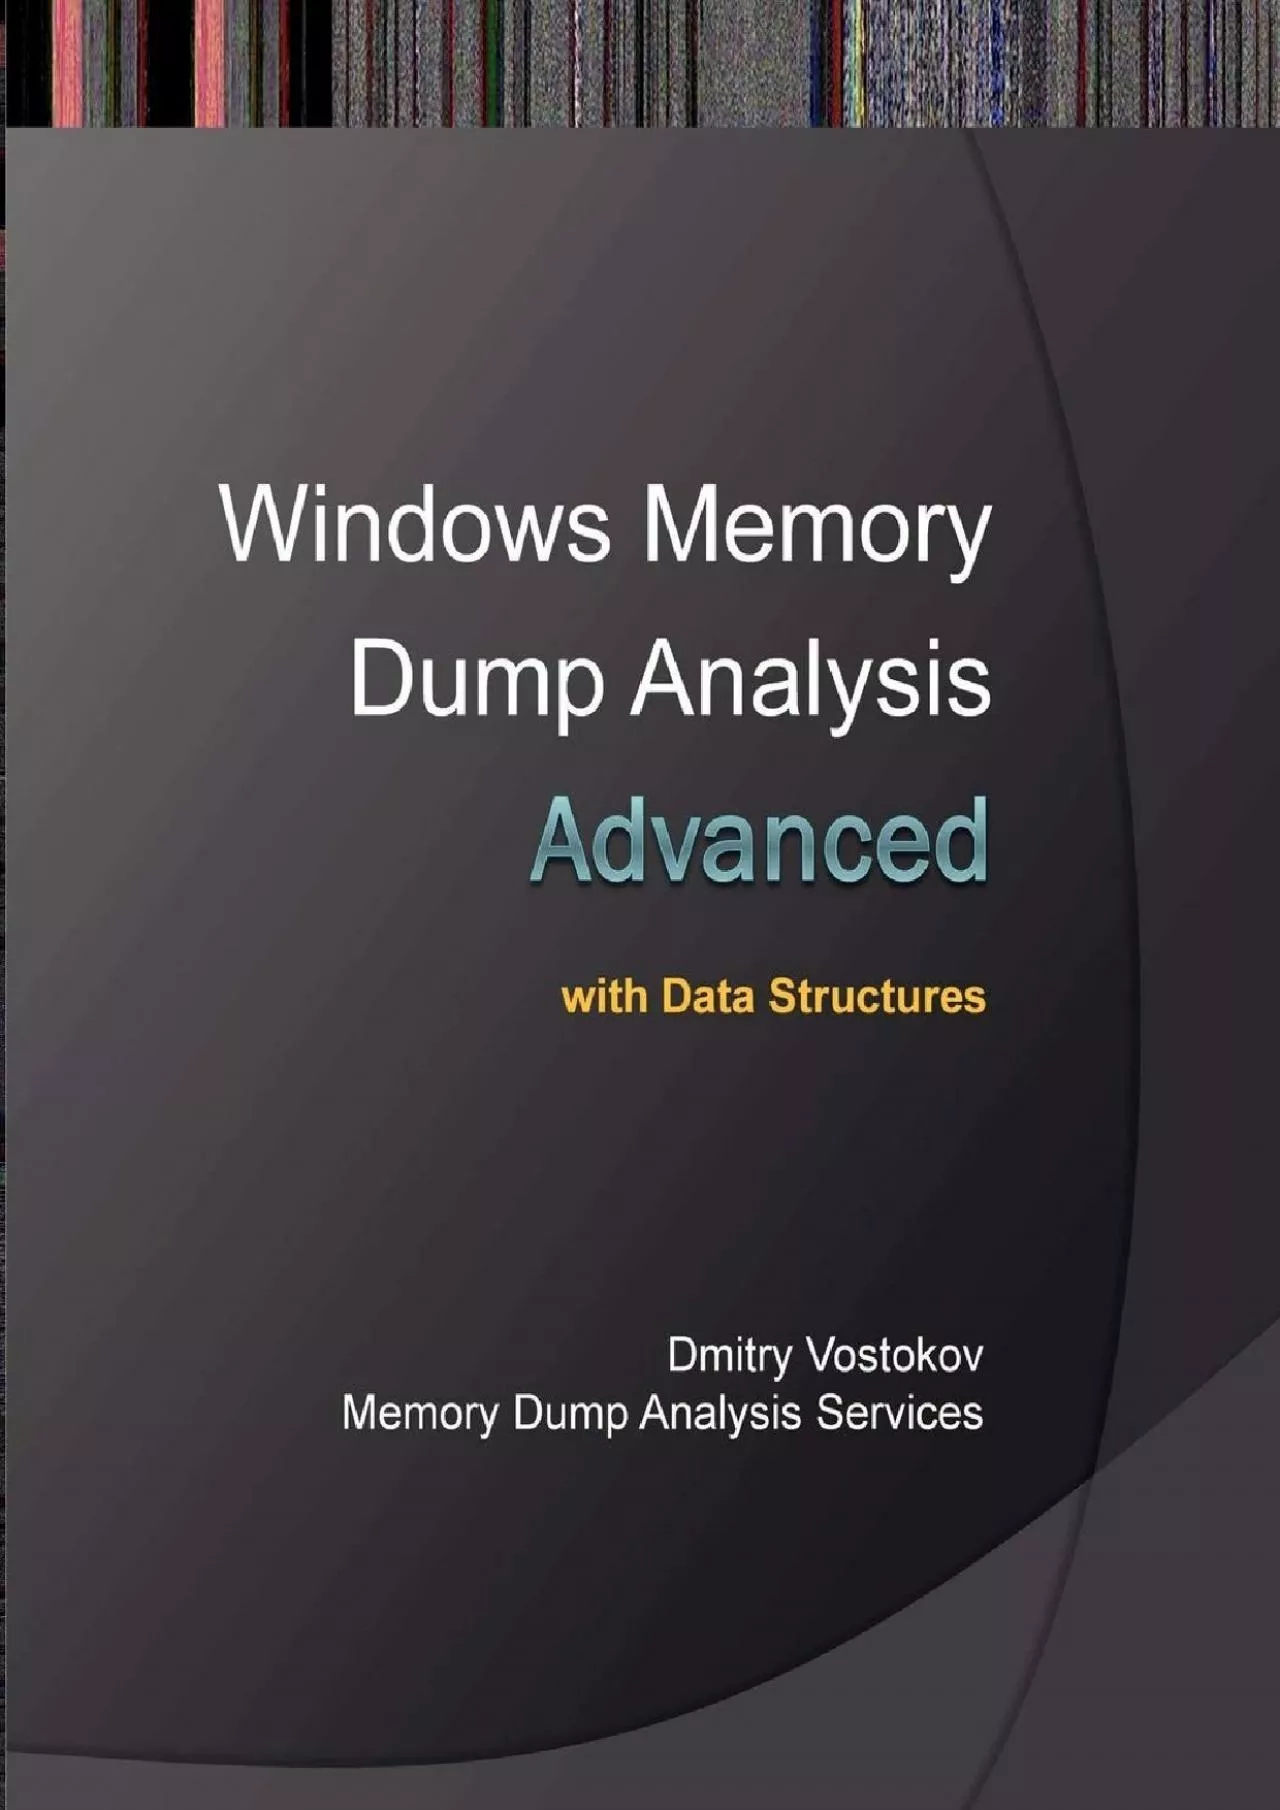 [READING BOOK]-Advanced Windows Memory Dump Analysis with Data Structures: Training Course